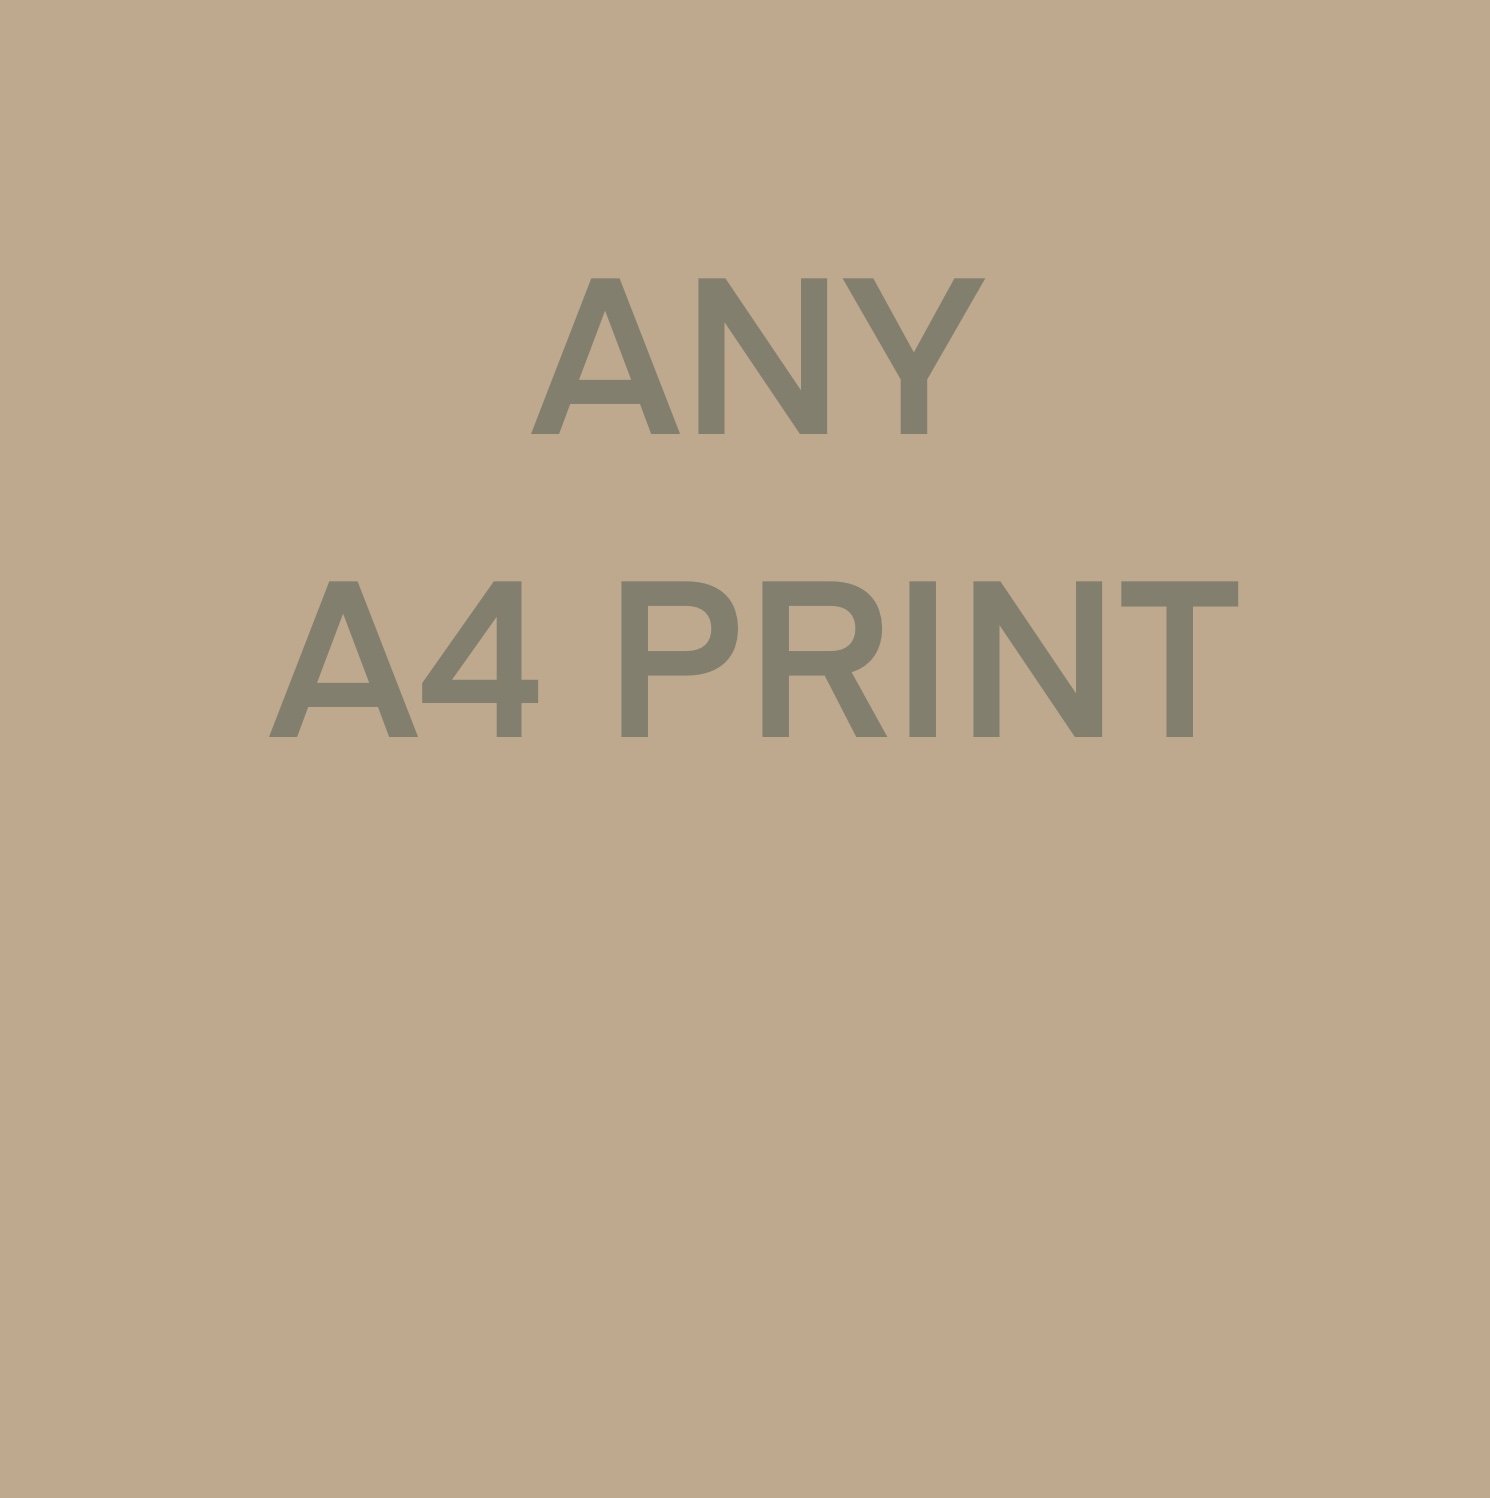 Image of Any A4 print